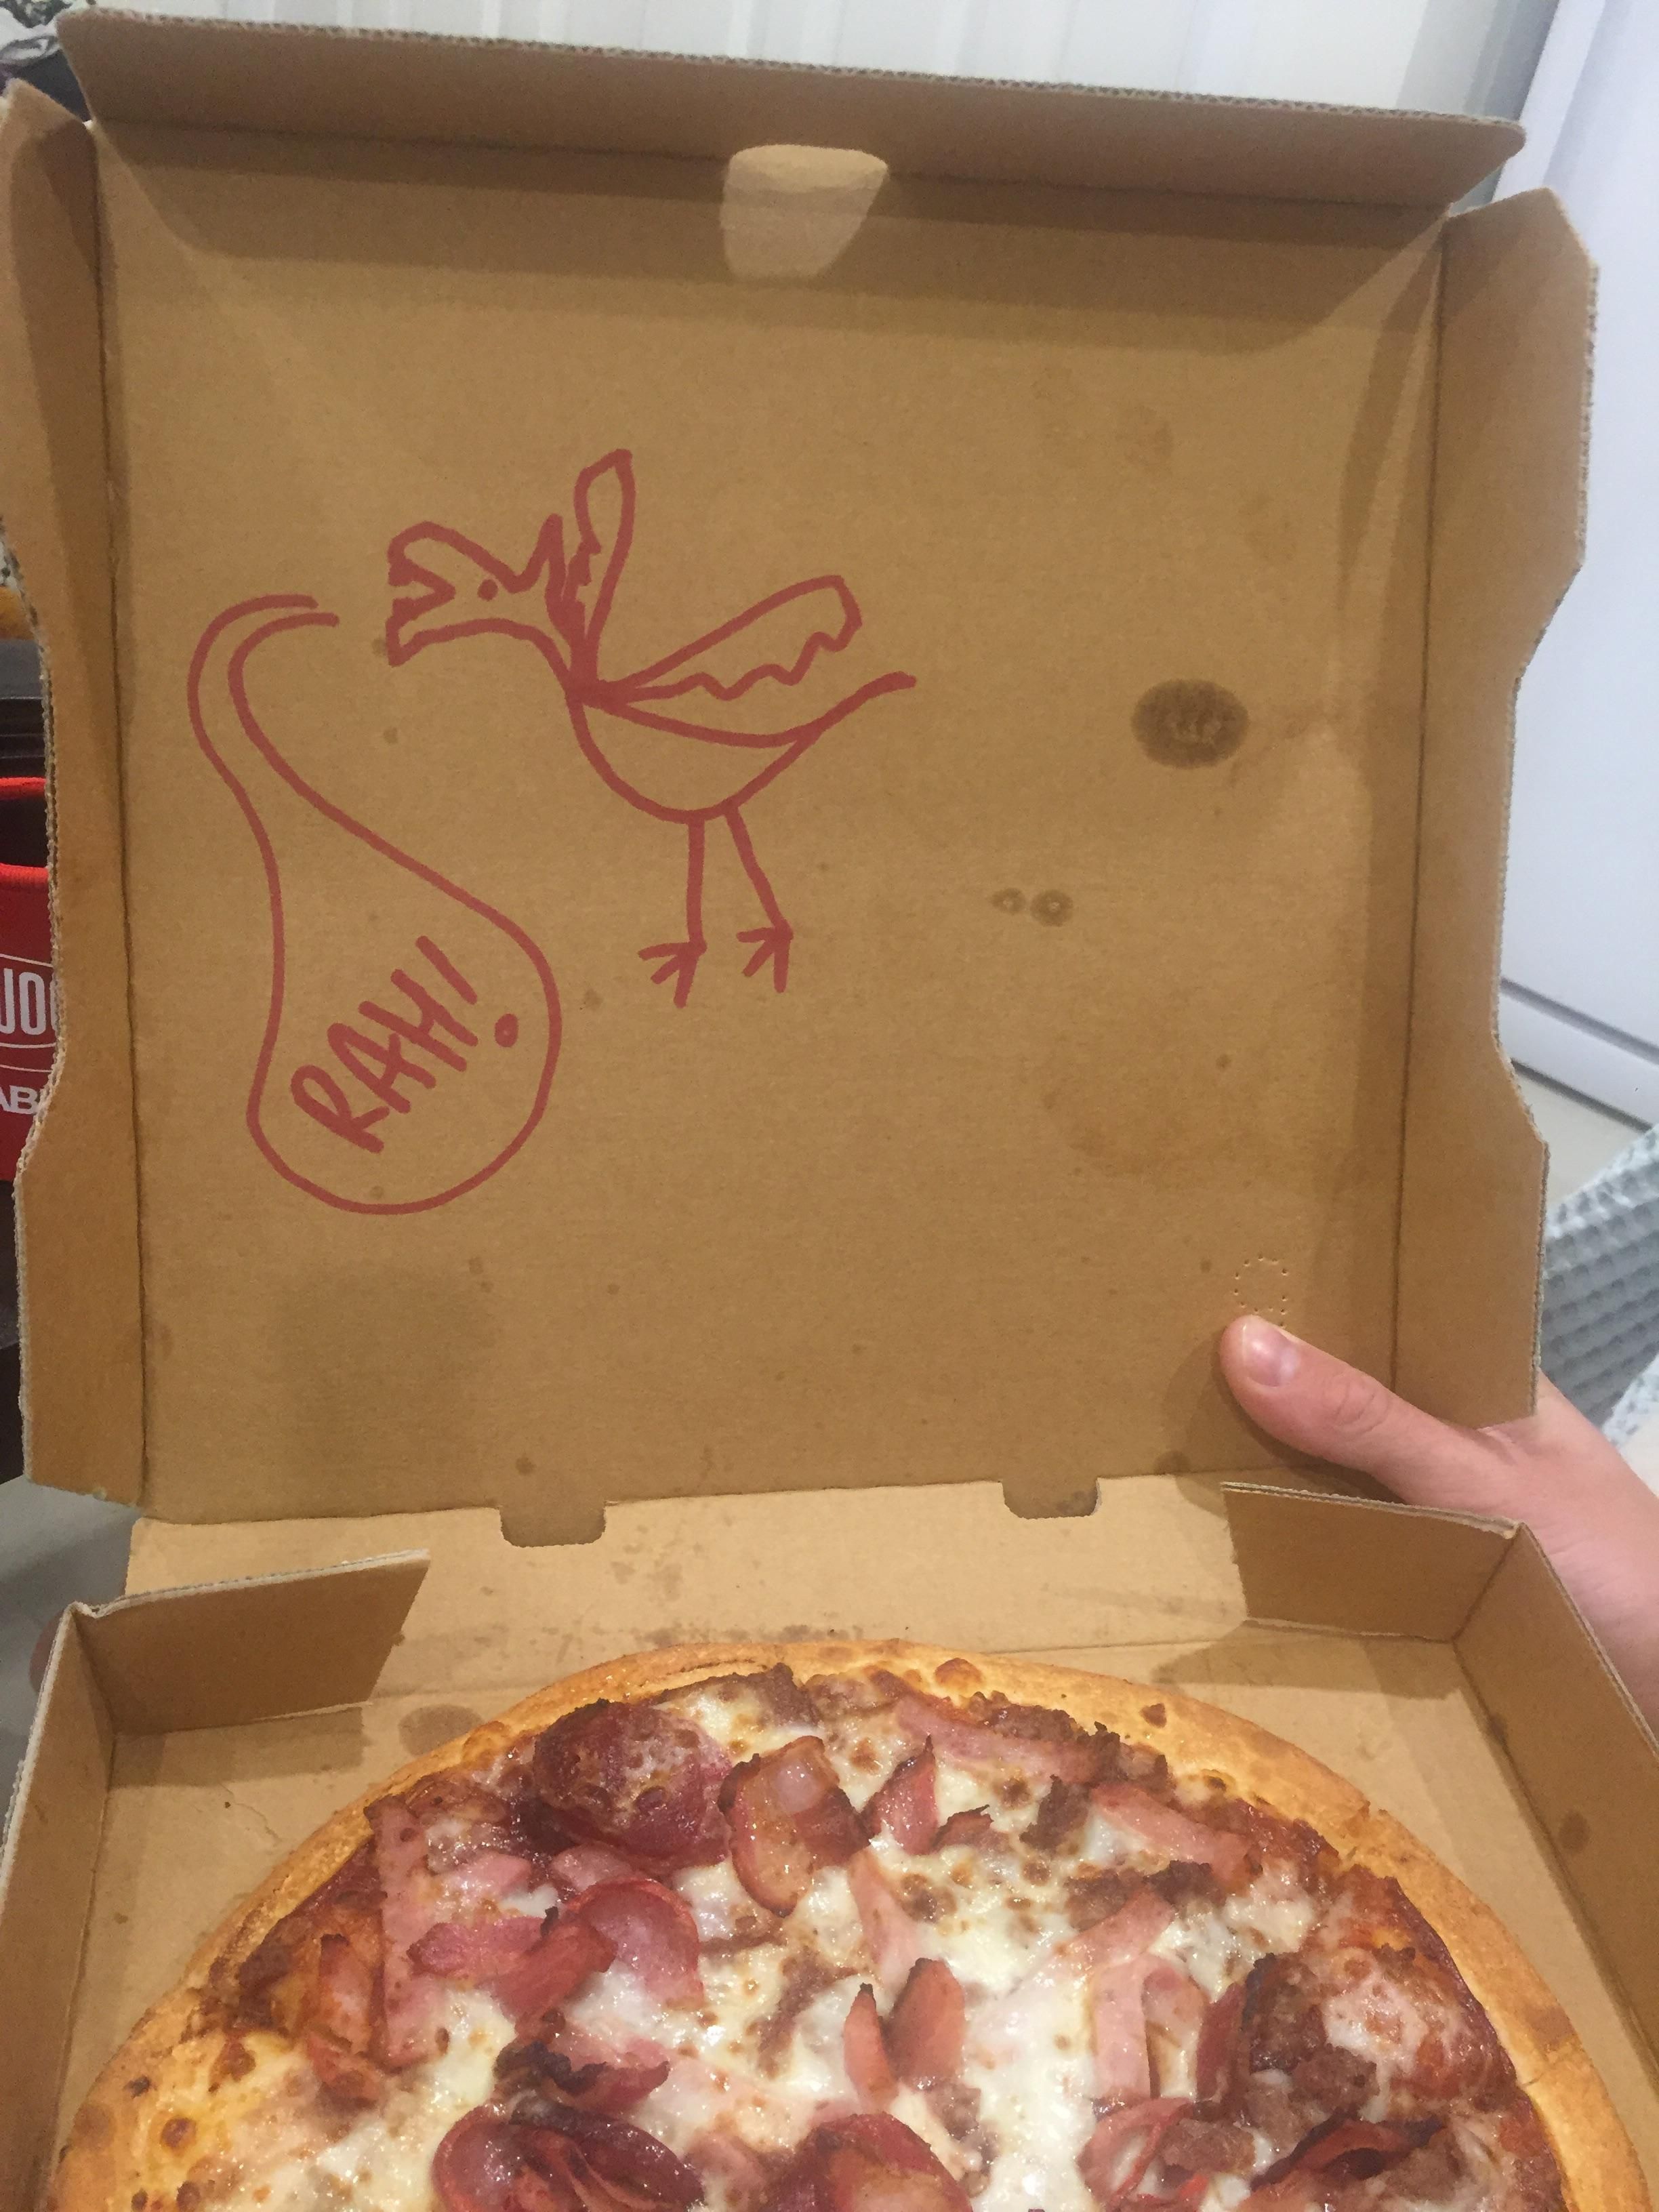 Asked Dominoes to ‘Draw your best Velociraptor on the box’